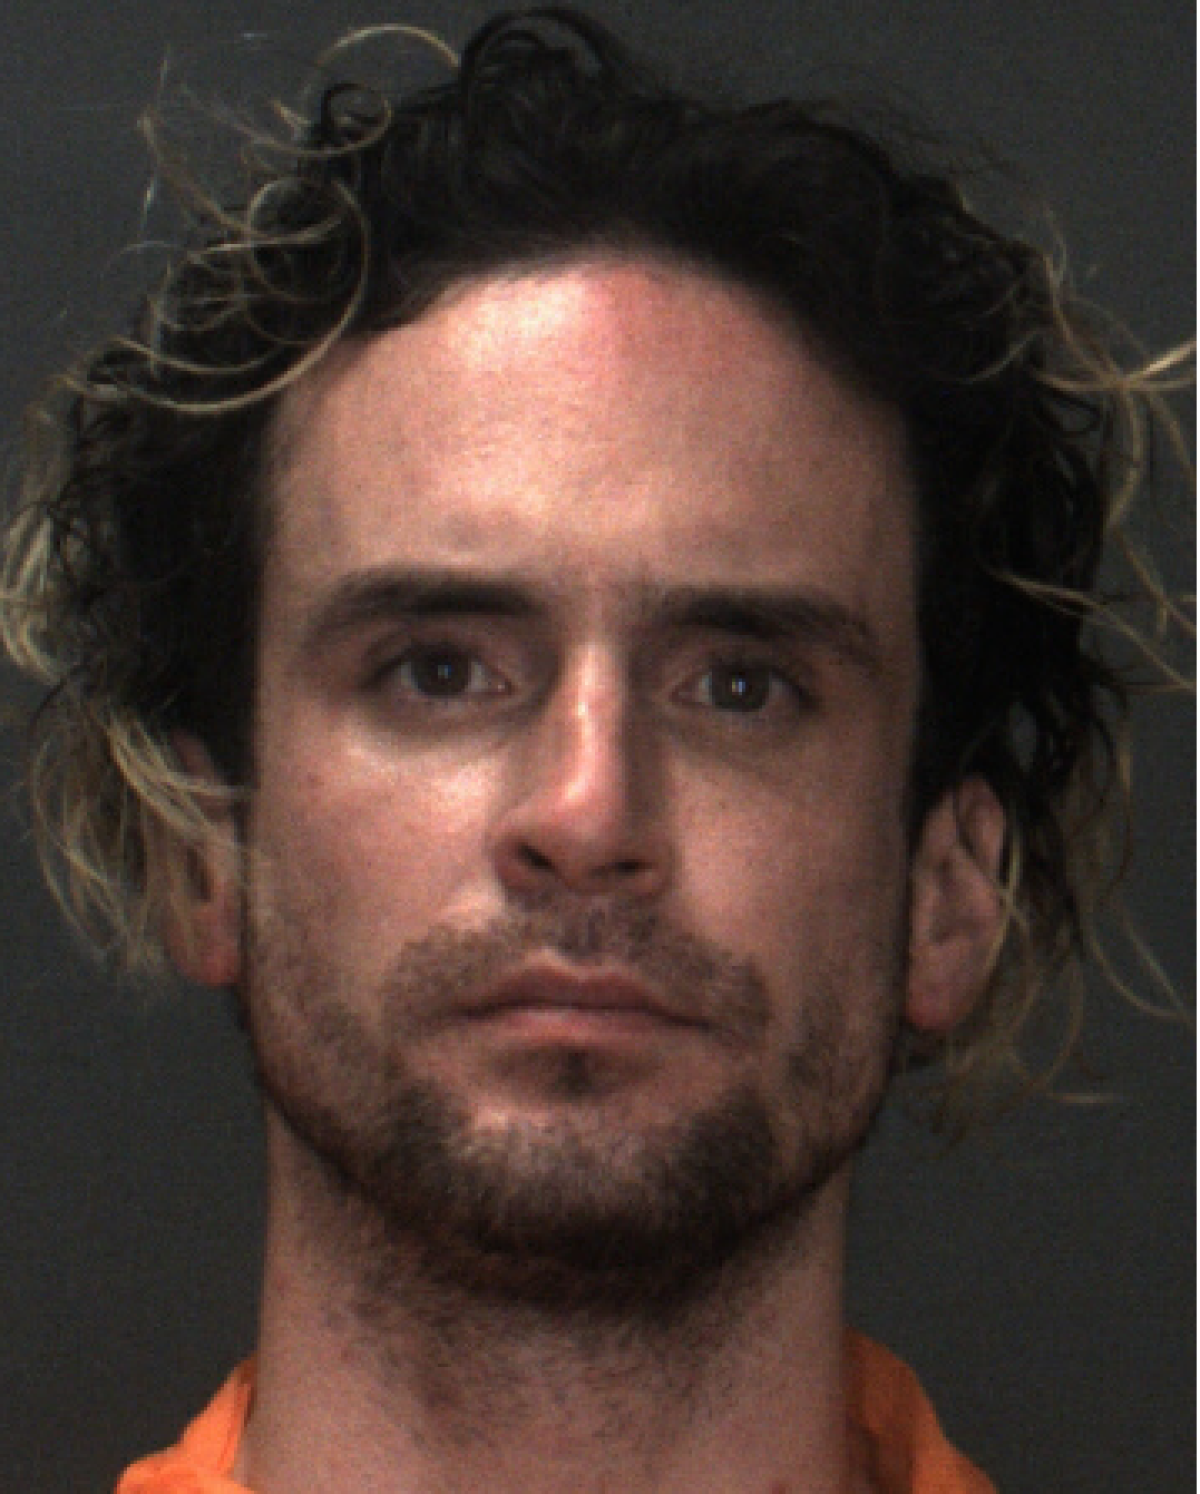 Joshua Blackwell-Tallent, 31, was arrested Friday after authorities found him in a hotel with a girl.